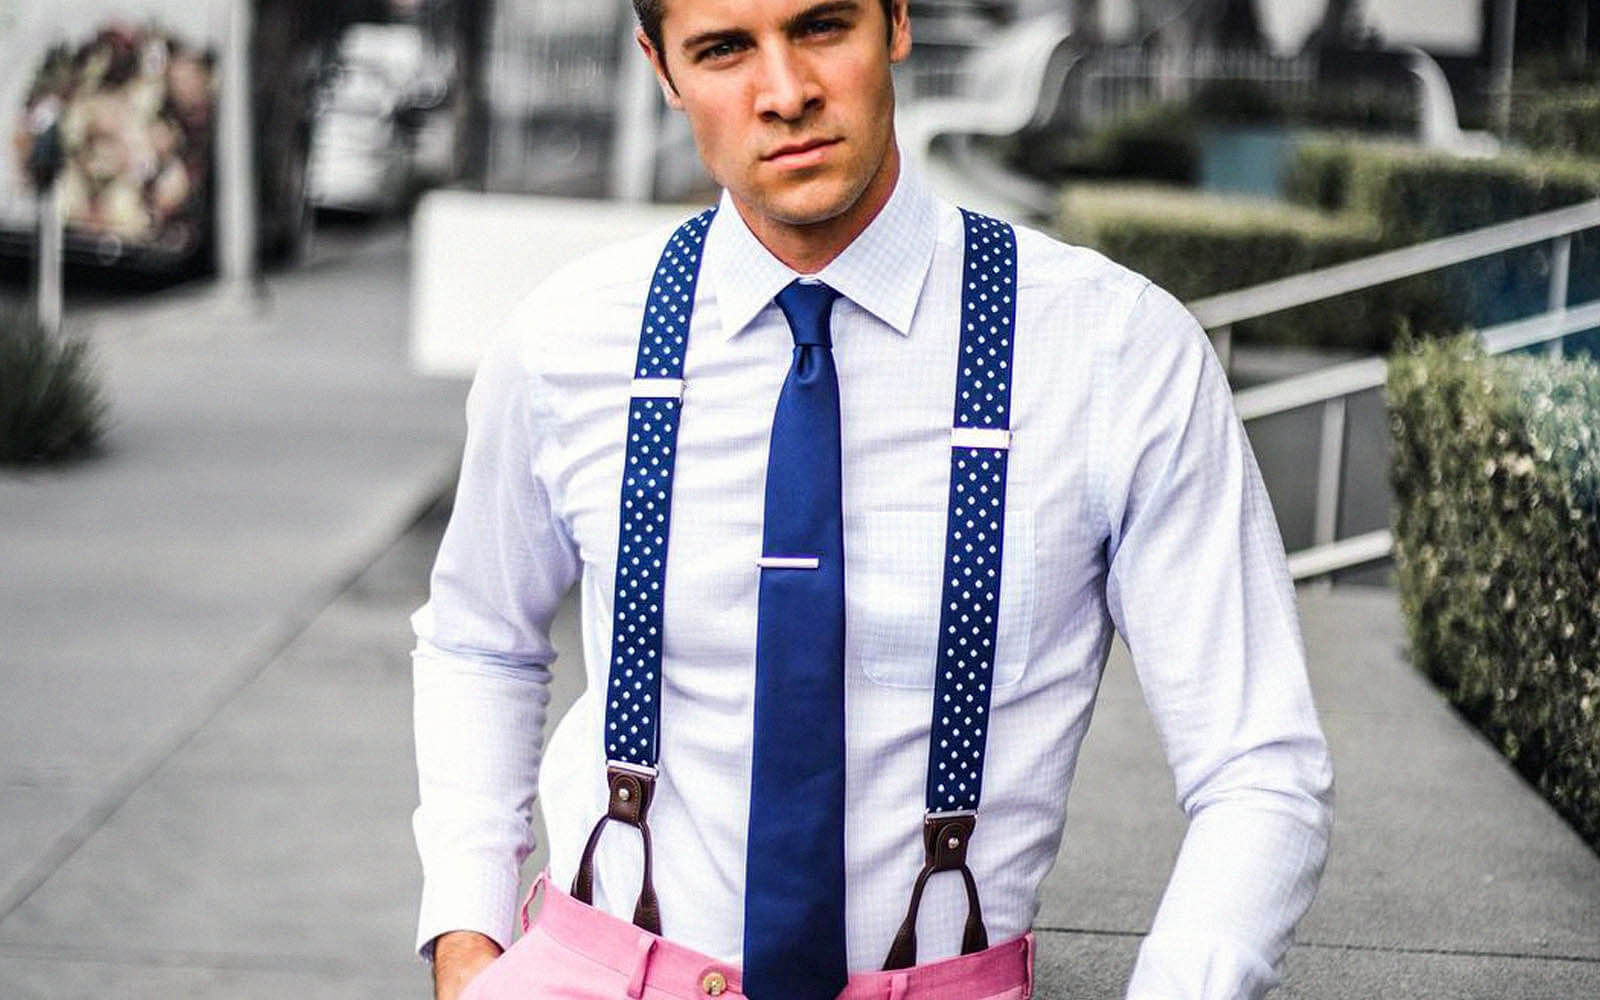 Male model wearing white button up with blue tie and blue polka dot suspenders